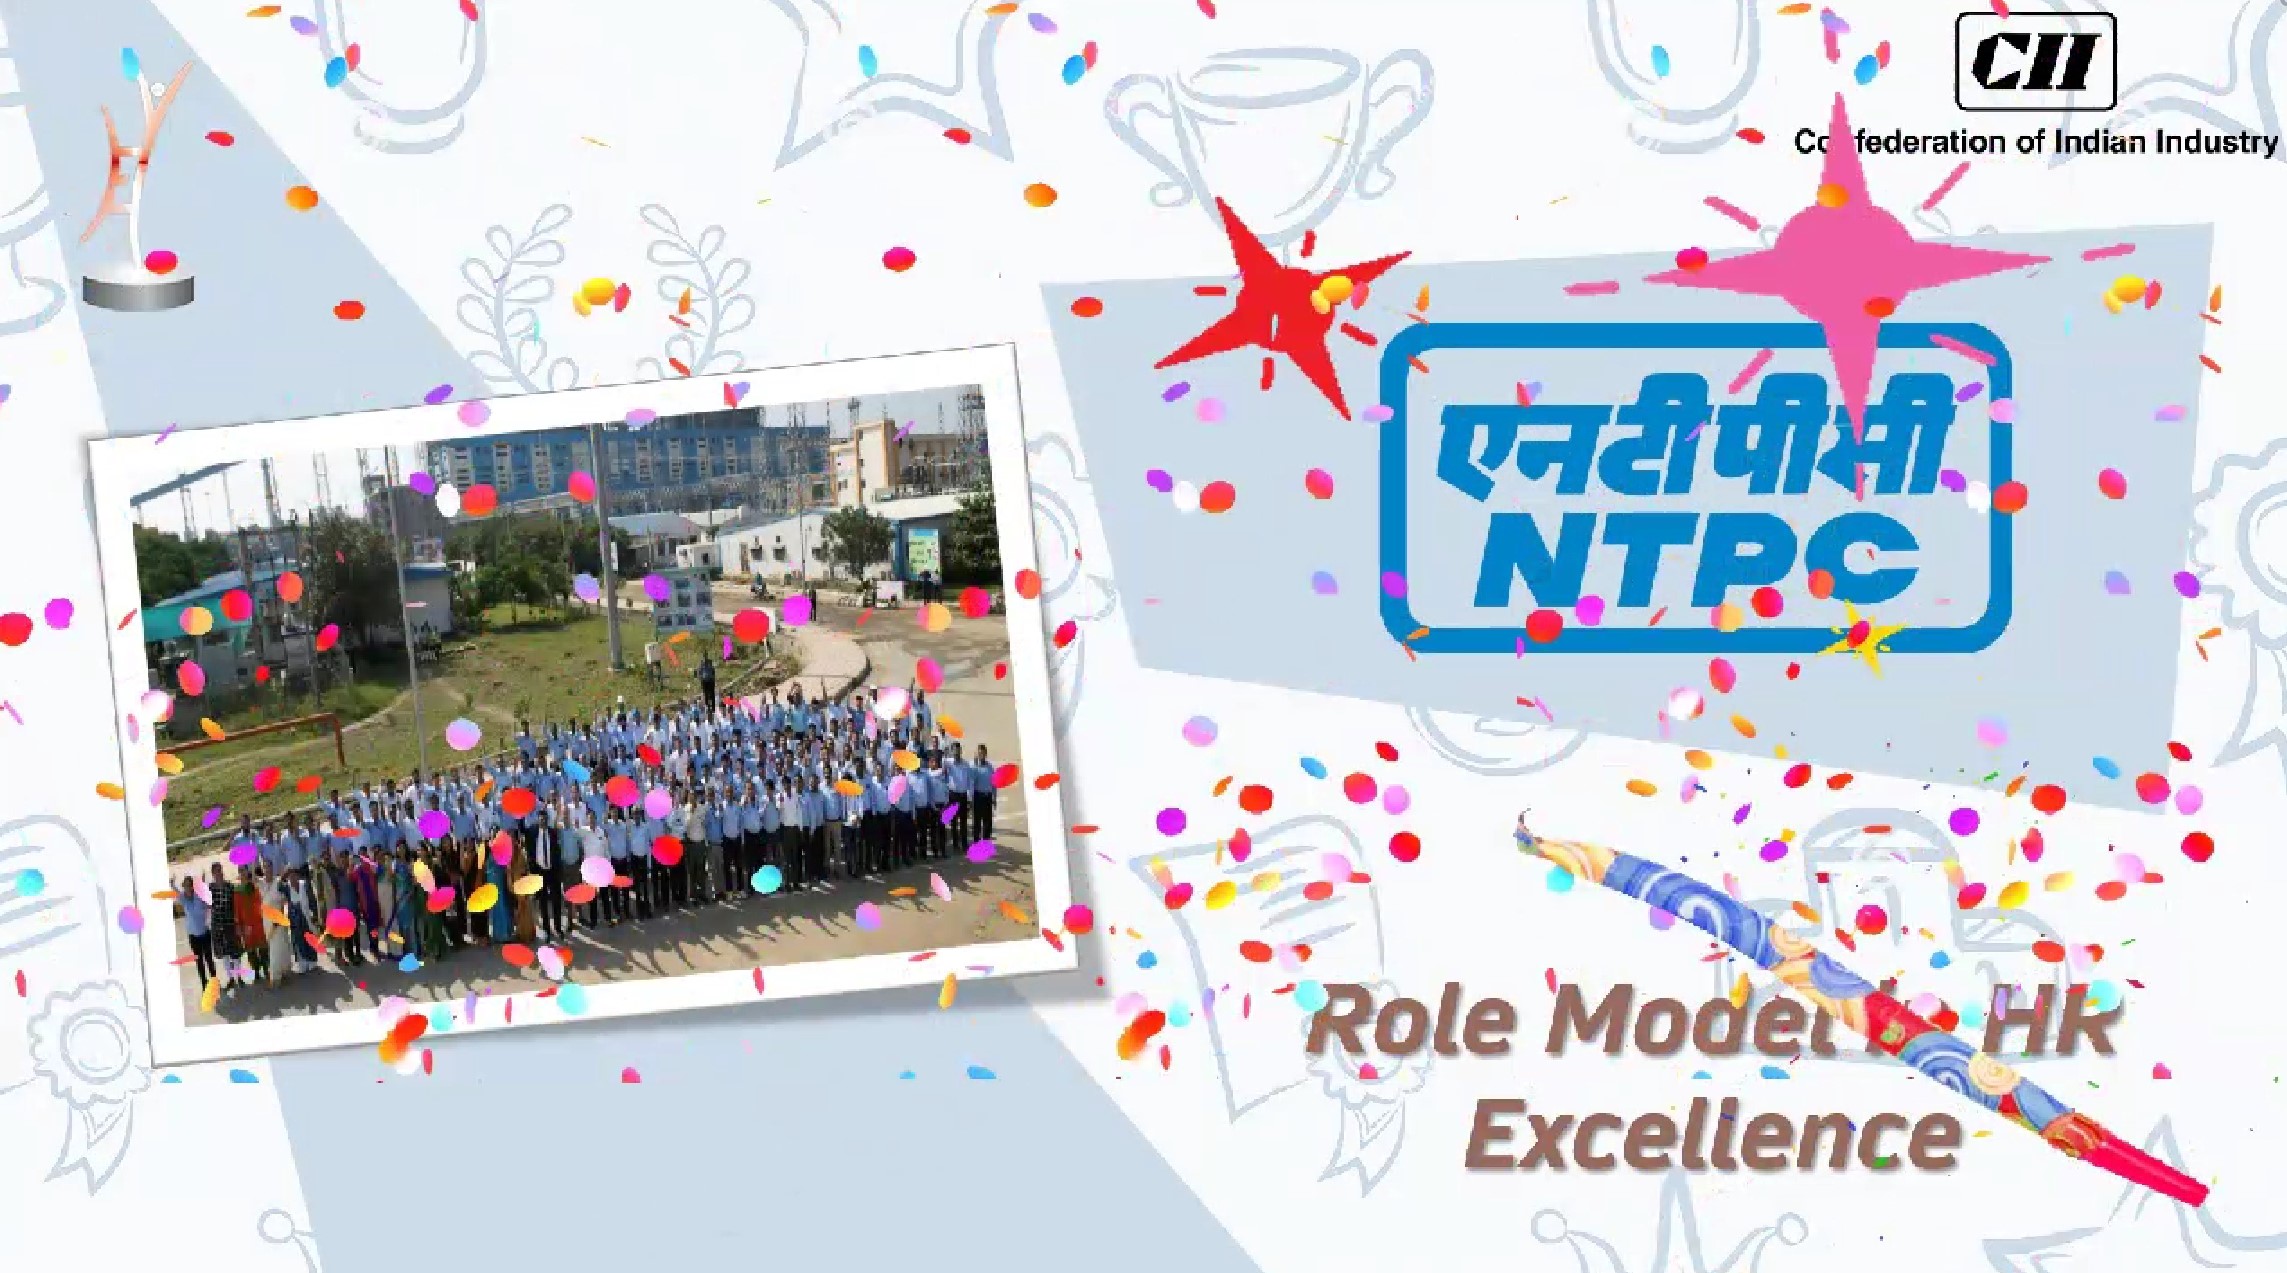 NTPC conferred ‘Role Model’ award at 11th CII National HR Excellence Award 2020-21 decoding=